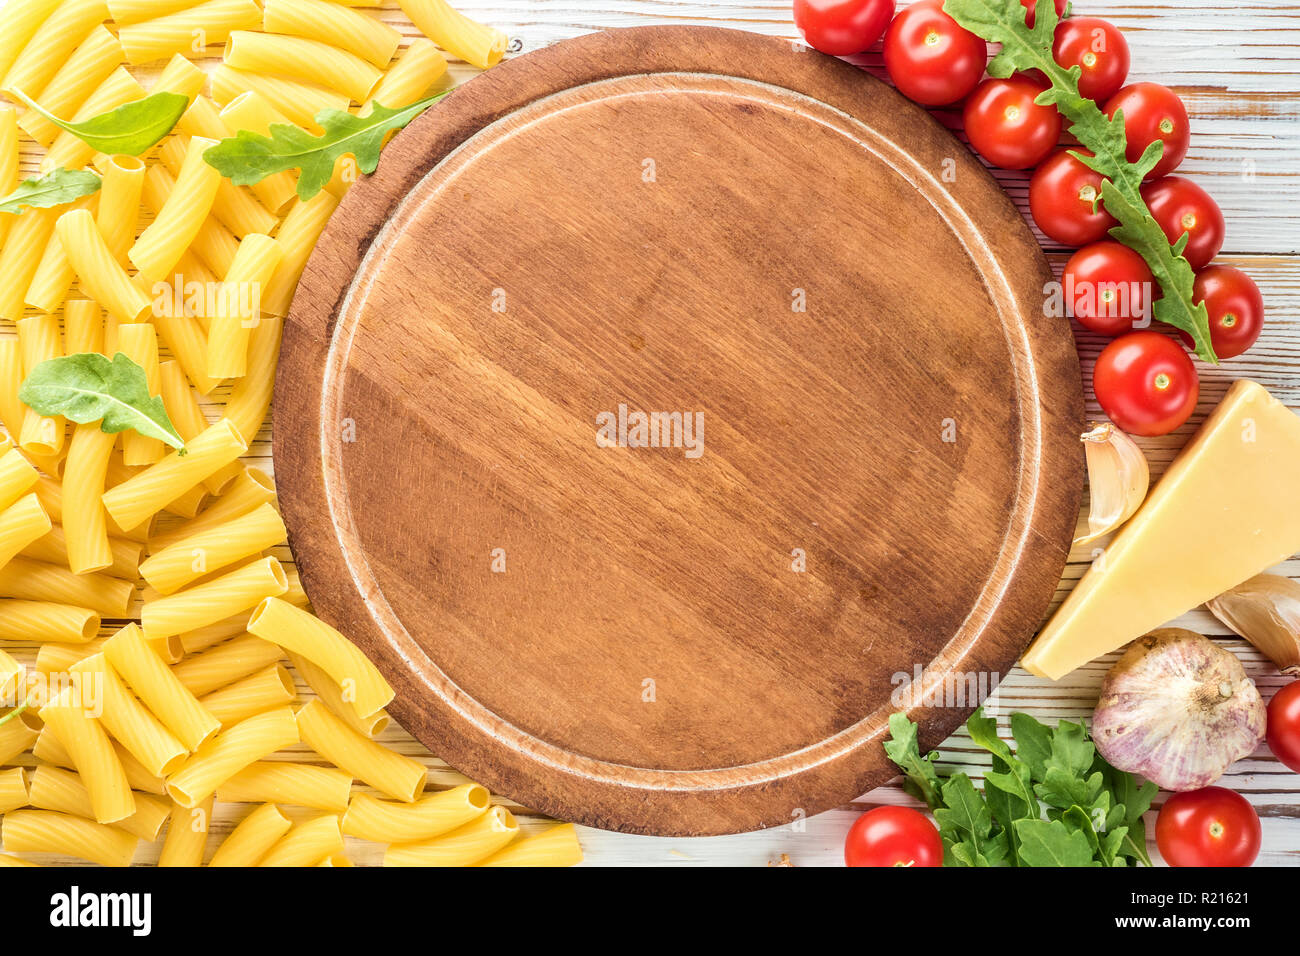 Italian Ingredients for cooking pasta with a kitchen board for copy space Cherry tomatoes arugula parmesan cheese rigatoni pasta garlic and olive oil. Concept food recipes top view flat lay Stock Photo